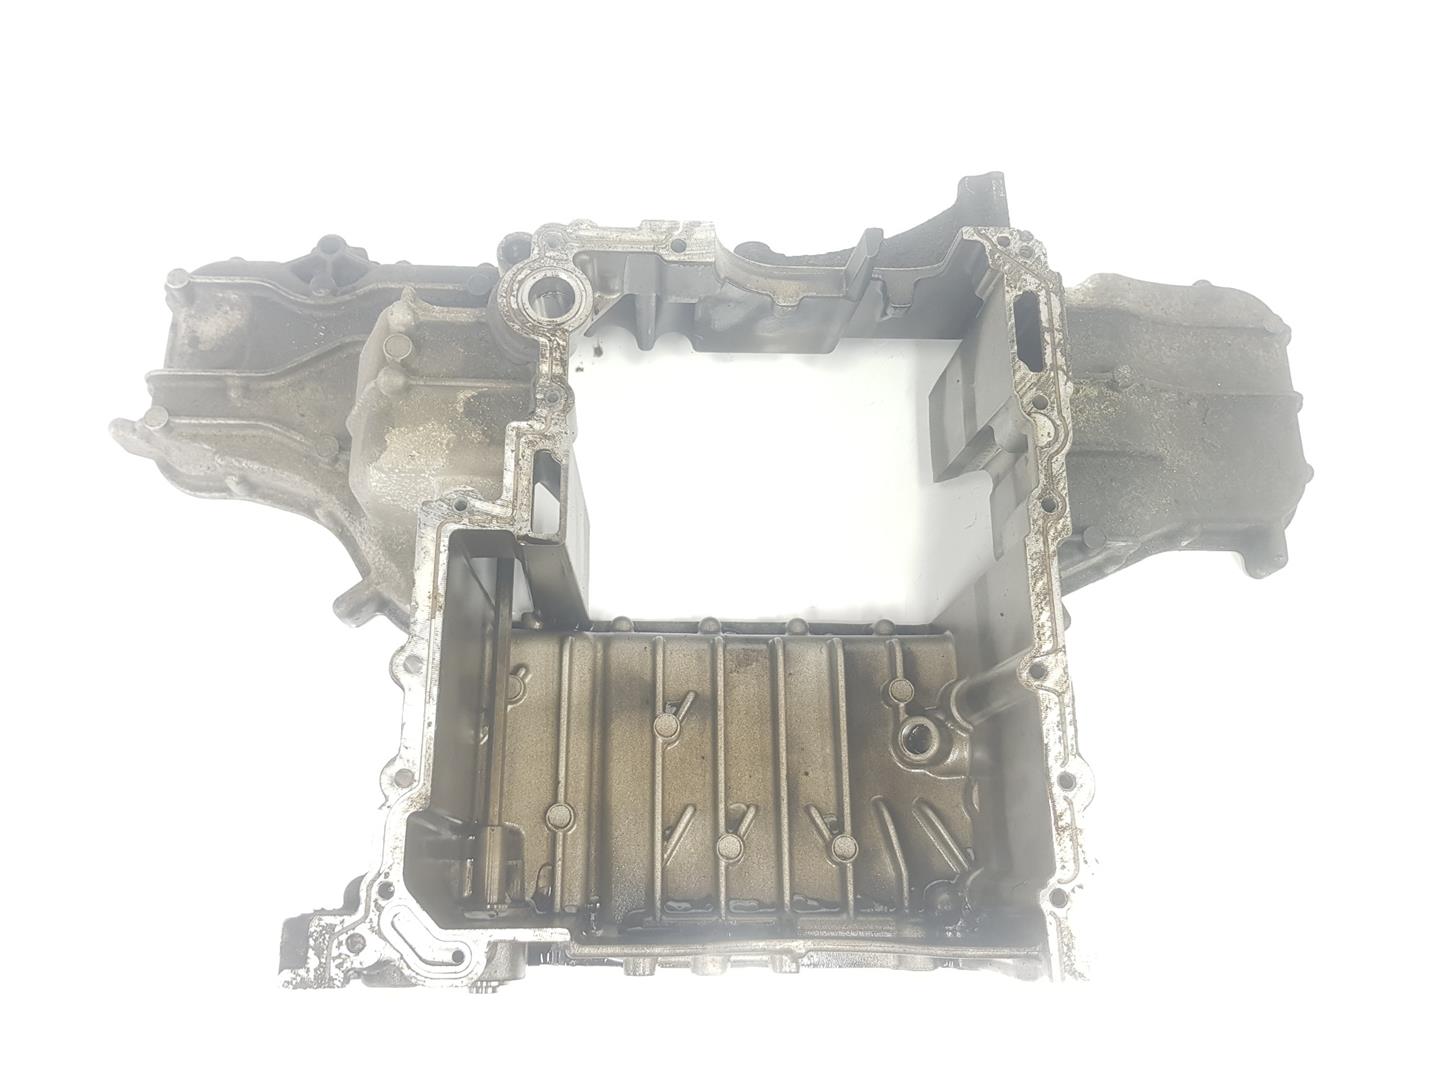 AUDI A6 C6/4F (2004-2011) Other Engine Compartment Parts 059103603T, 059103603T, 1111AA 19933366